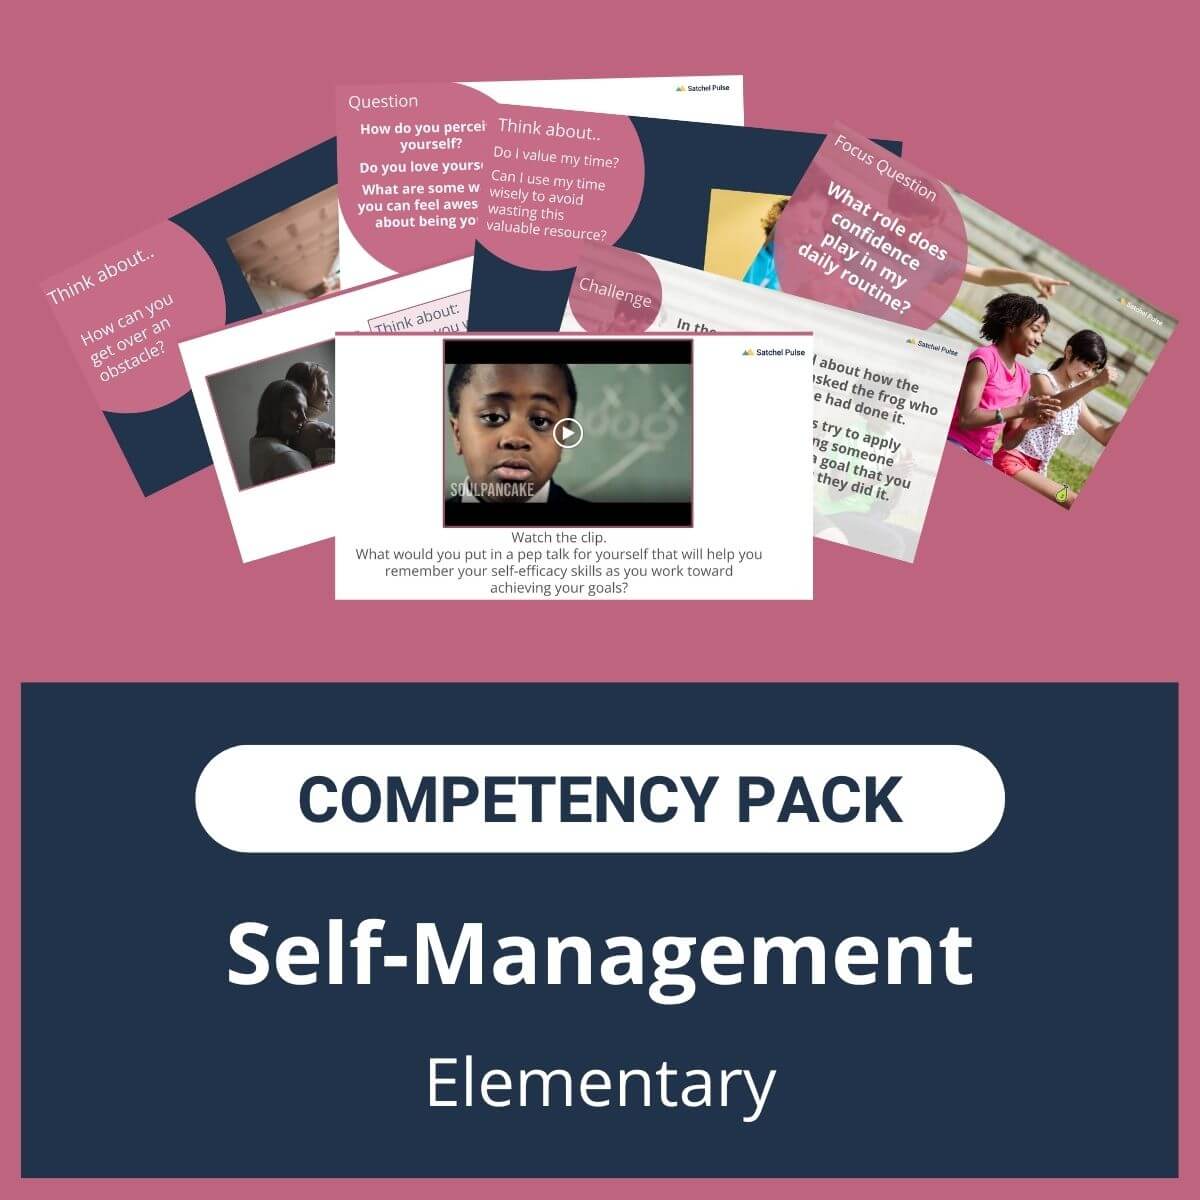 This SEL Resource pack for "Self-Management" competency includes a range of SEL activities such as SEL lessons and self-studies